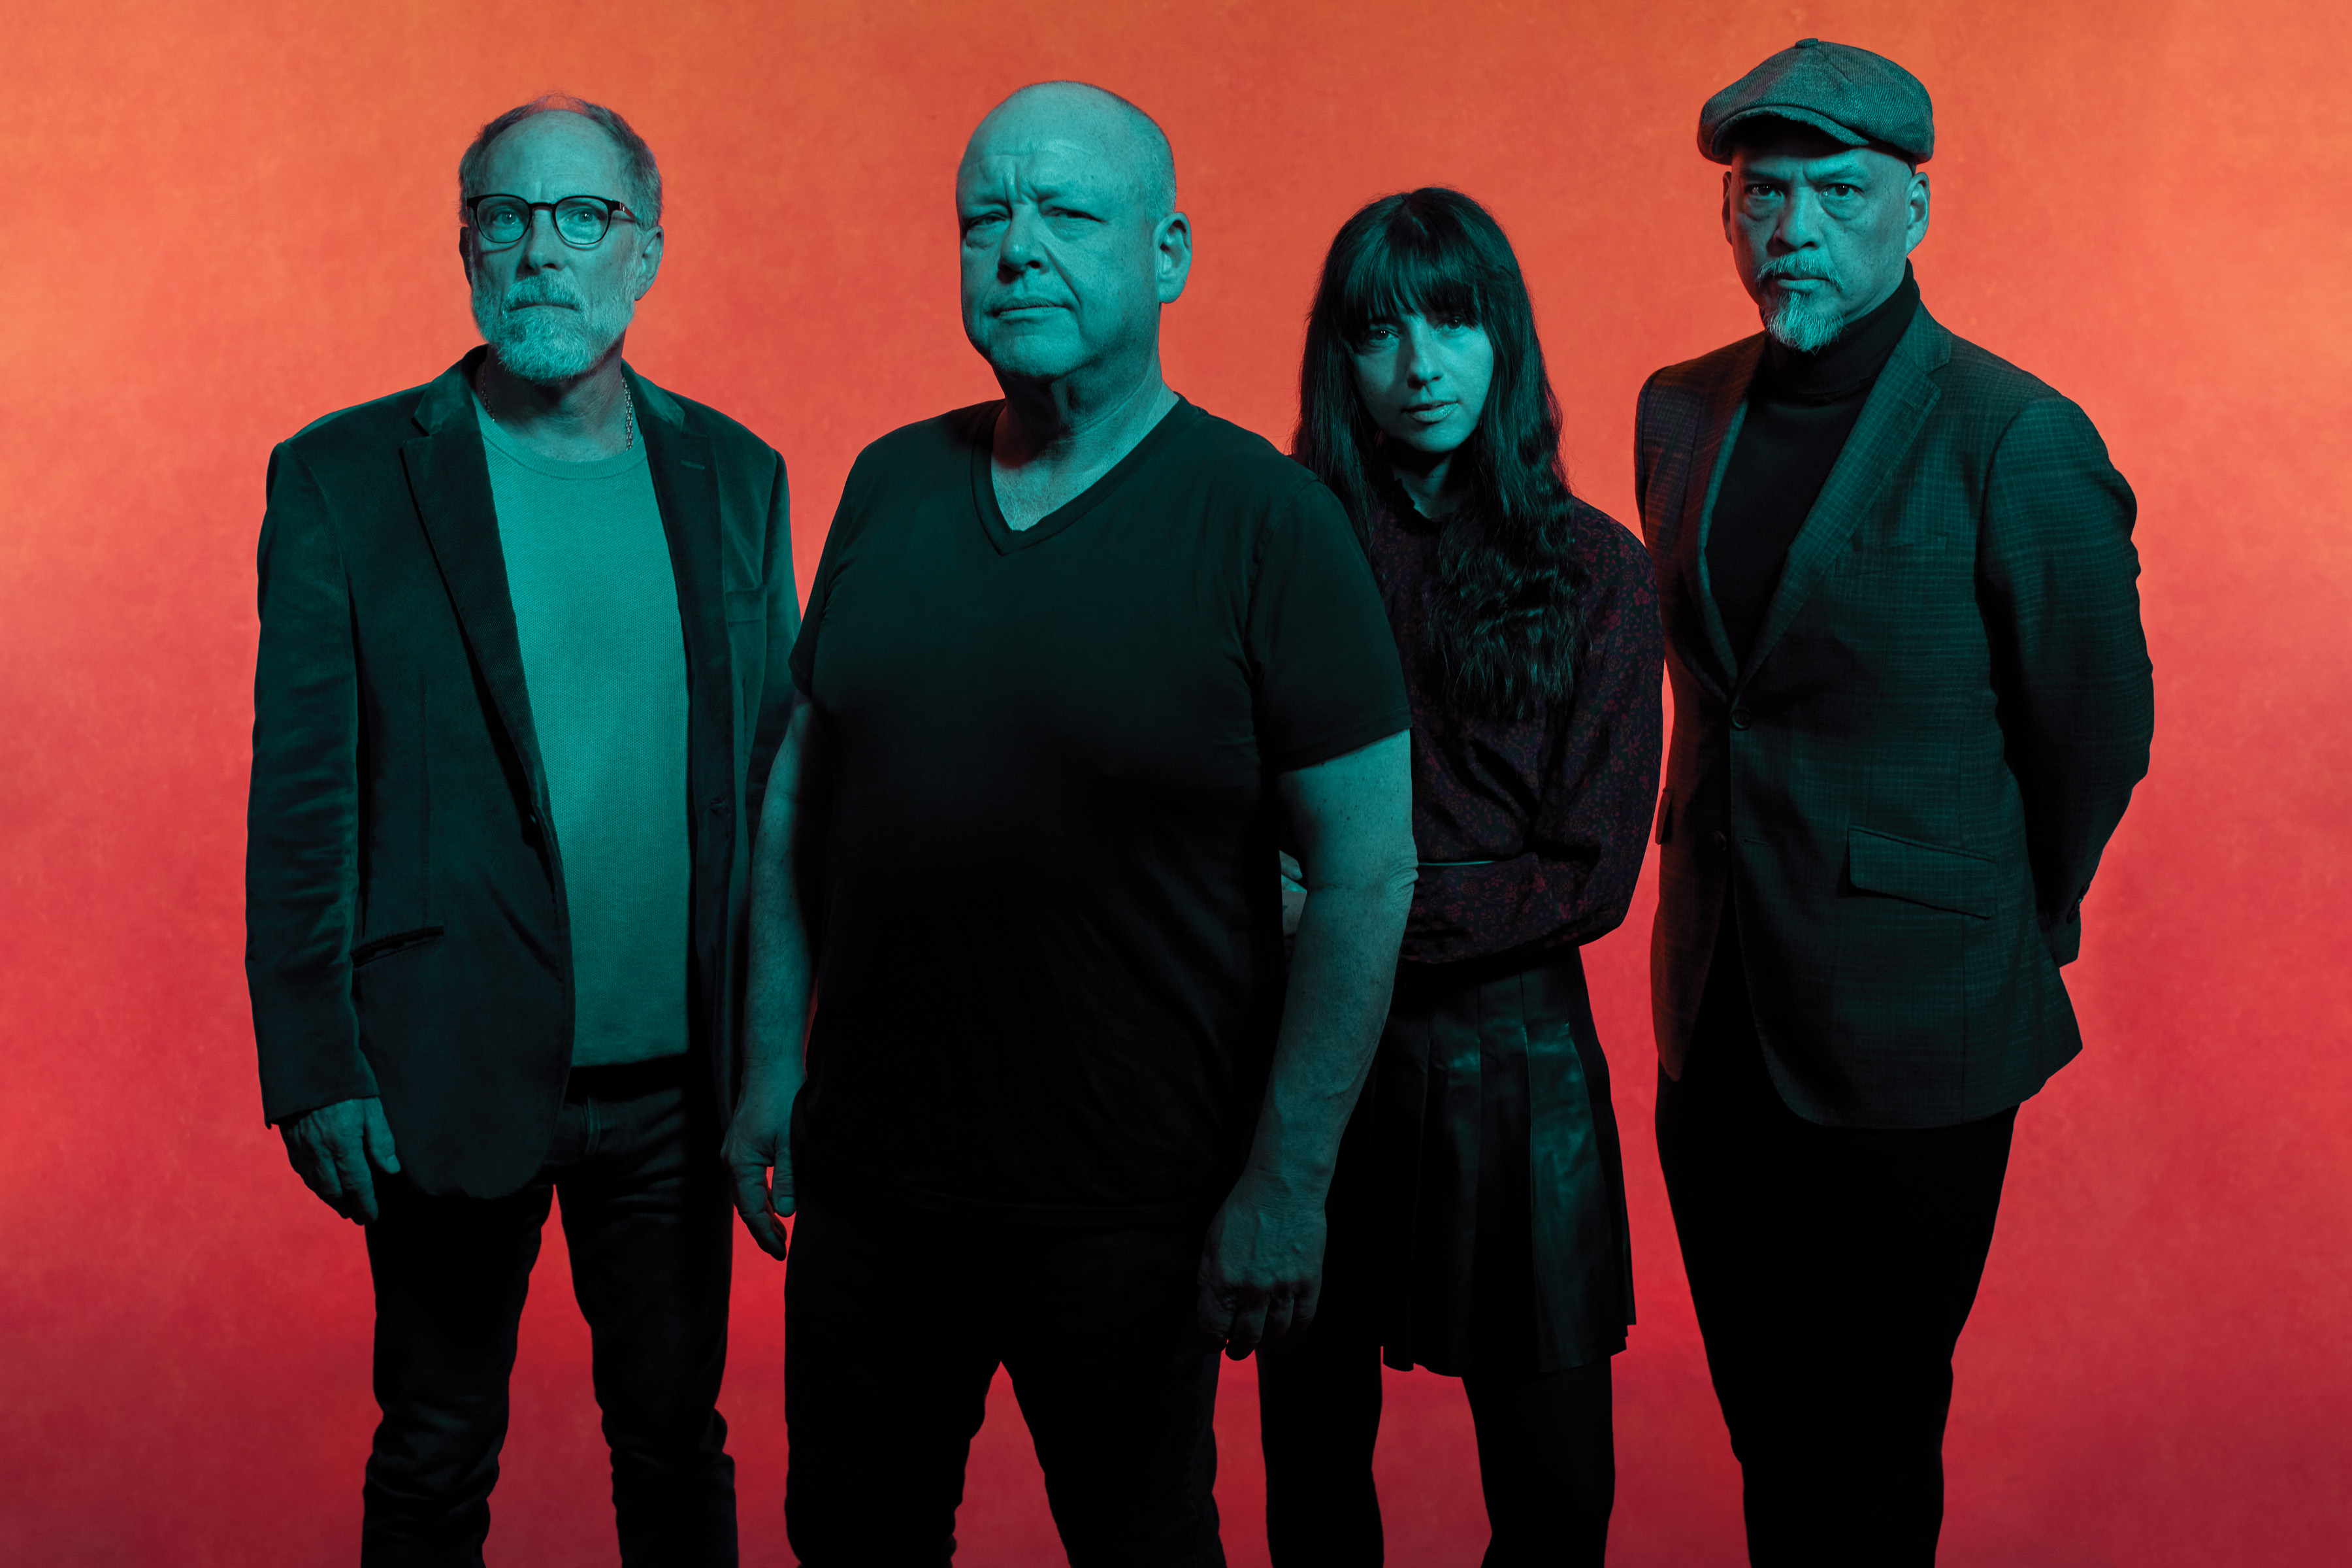 Against a red backdrop, Pixies face the camera